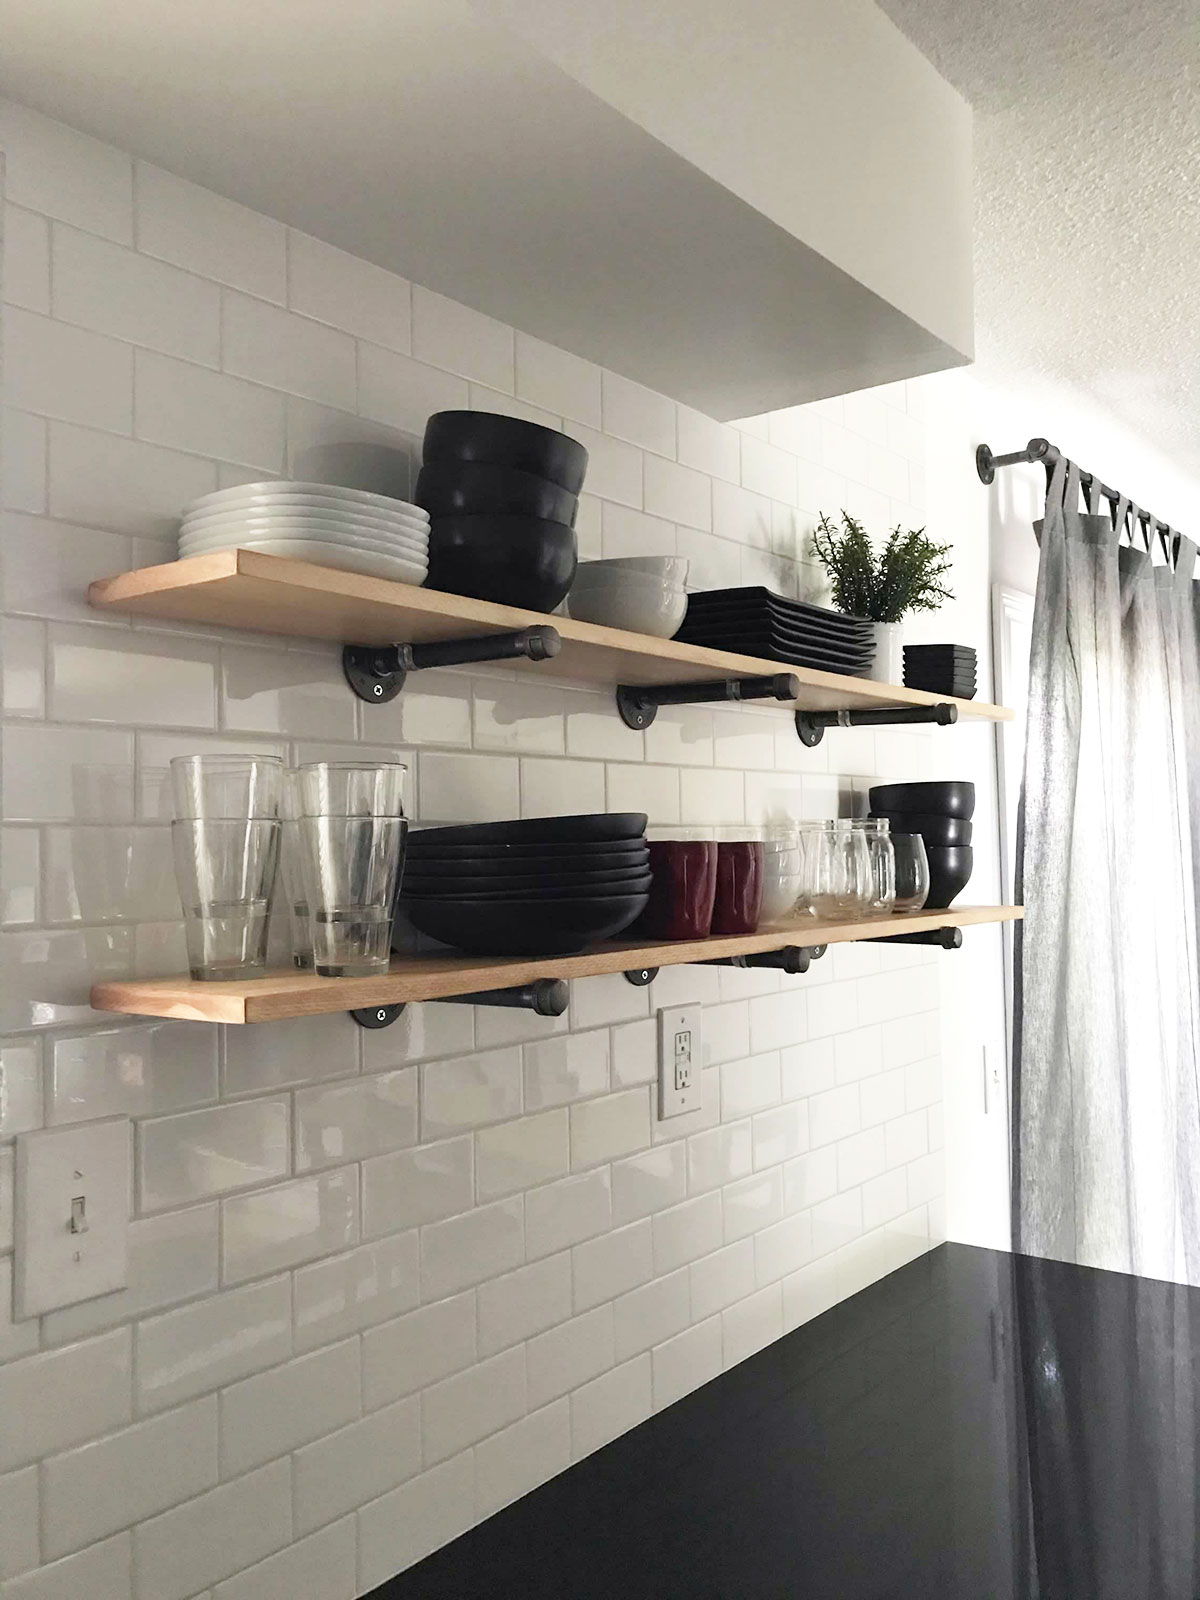 Two open shelves against a white tile backsplash hold a display of black and white dishes.